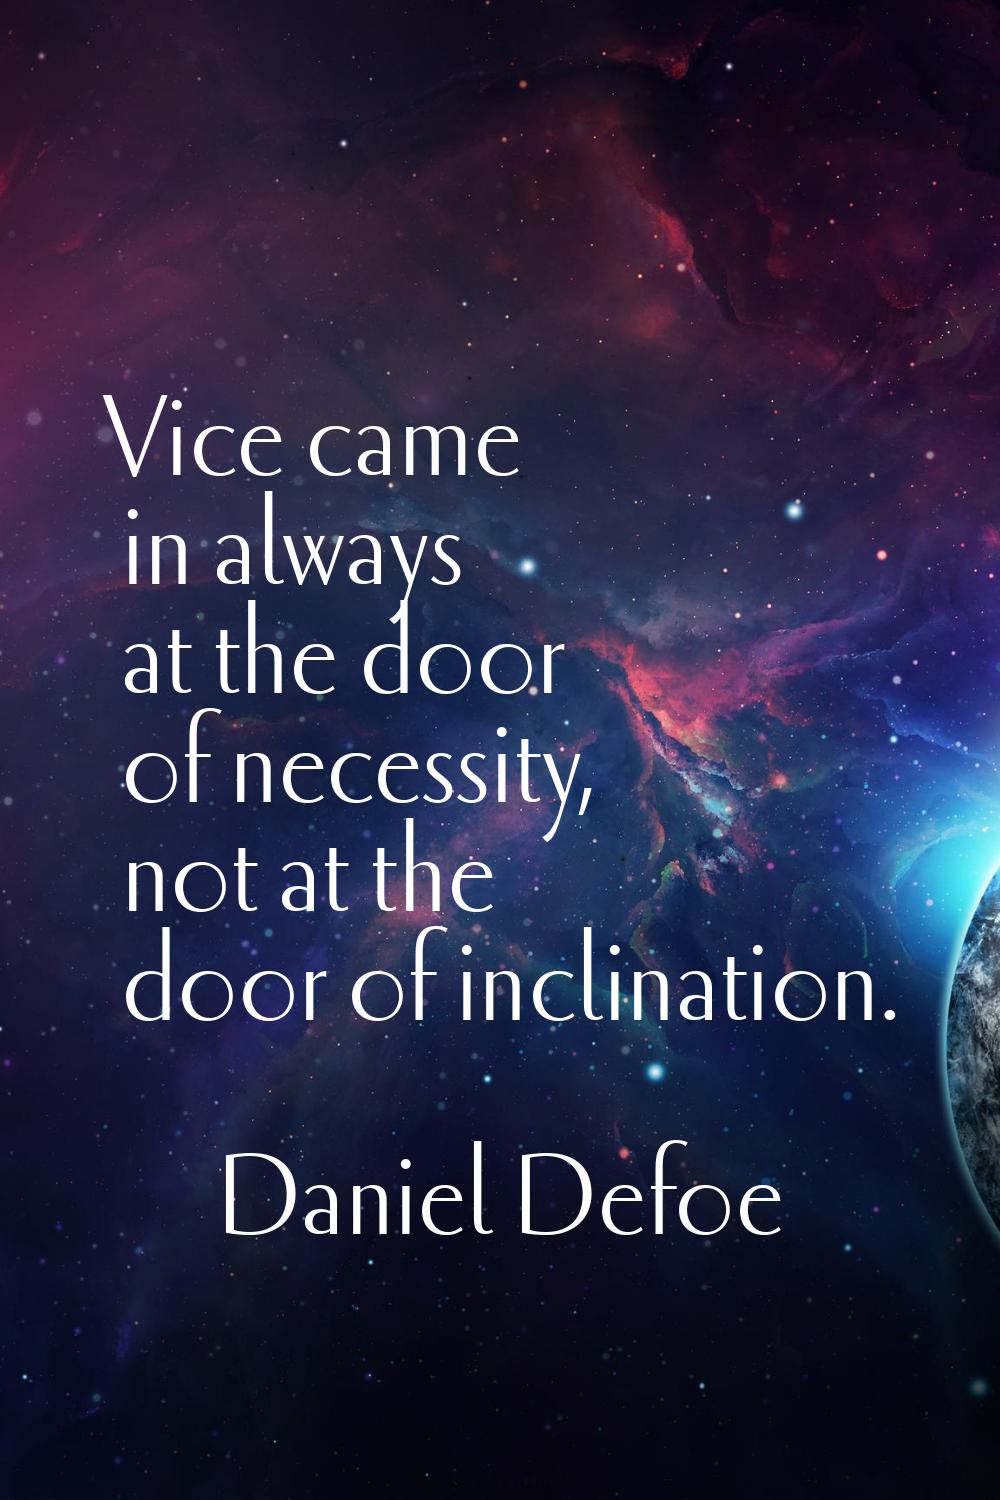 Vice came in always at the door of necessity, not at the door of inclination.